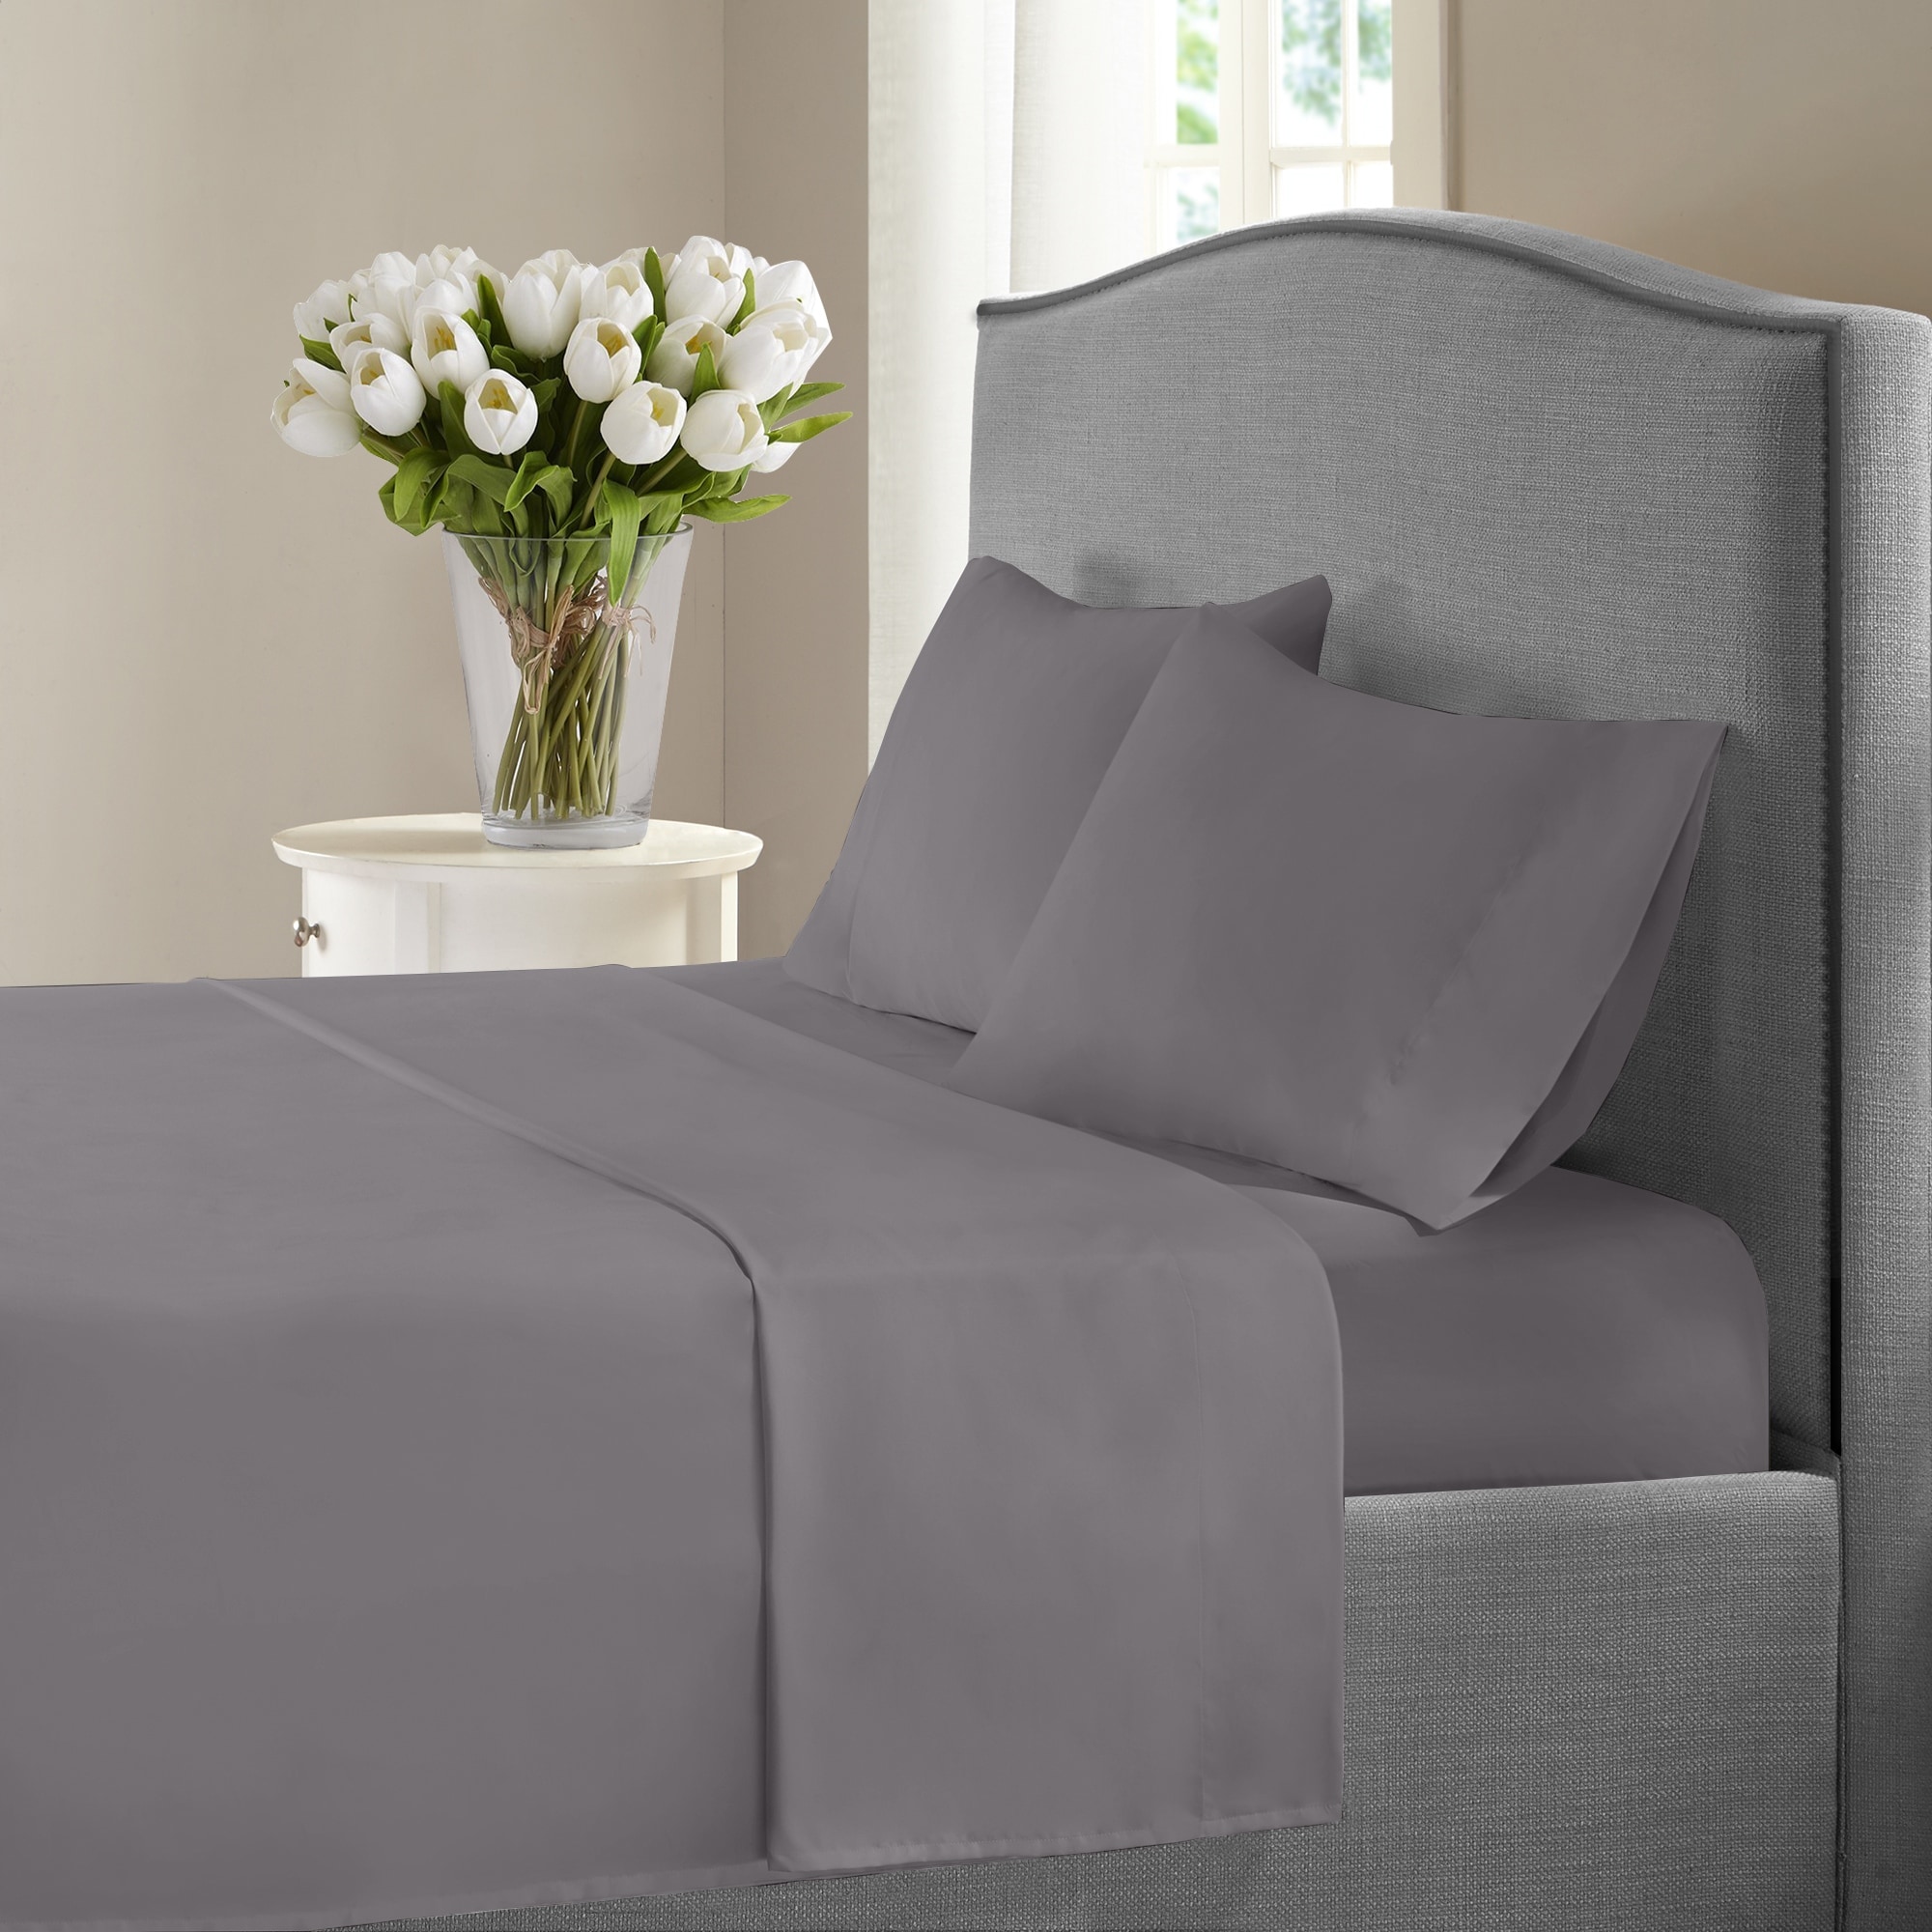 Top Bedding Sheet Set-Fitted/Flat/Bed Skirt 1200 TC Egyptian Cotton Grey Solid 